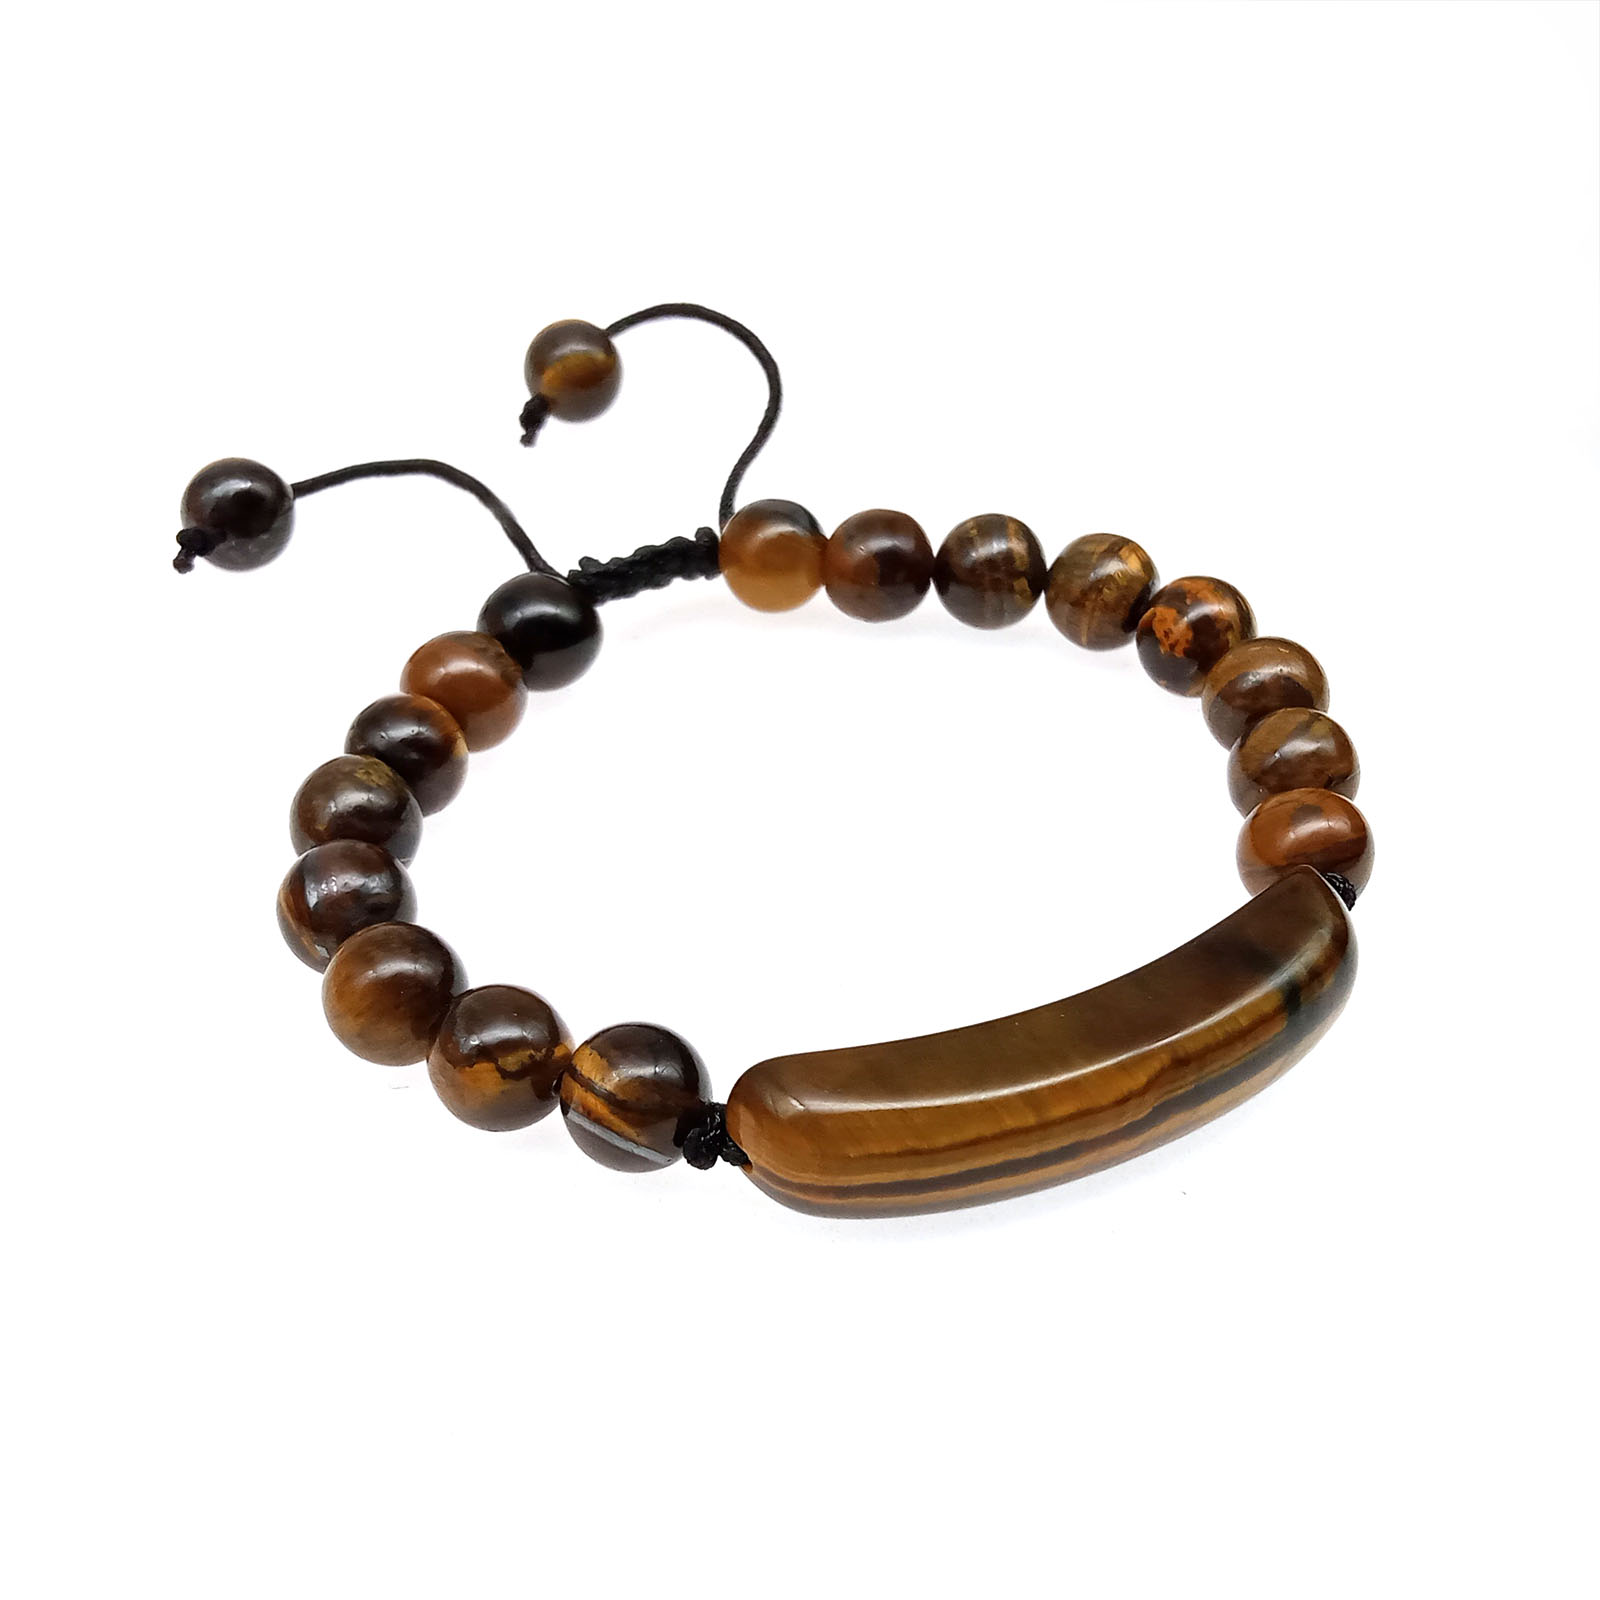 1:Adjustable size, made of 18 8mm round beads and a long strip